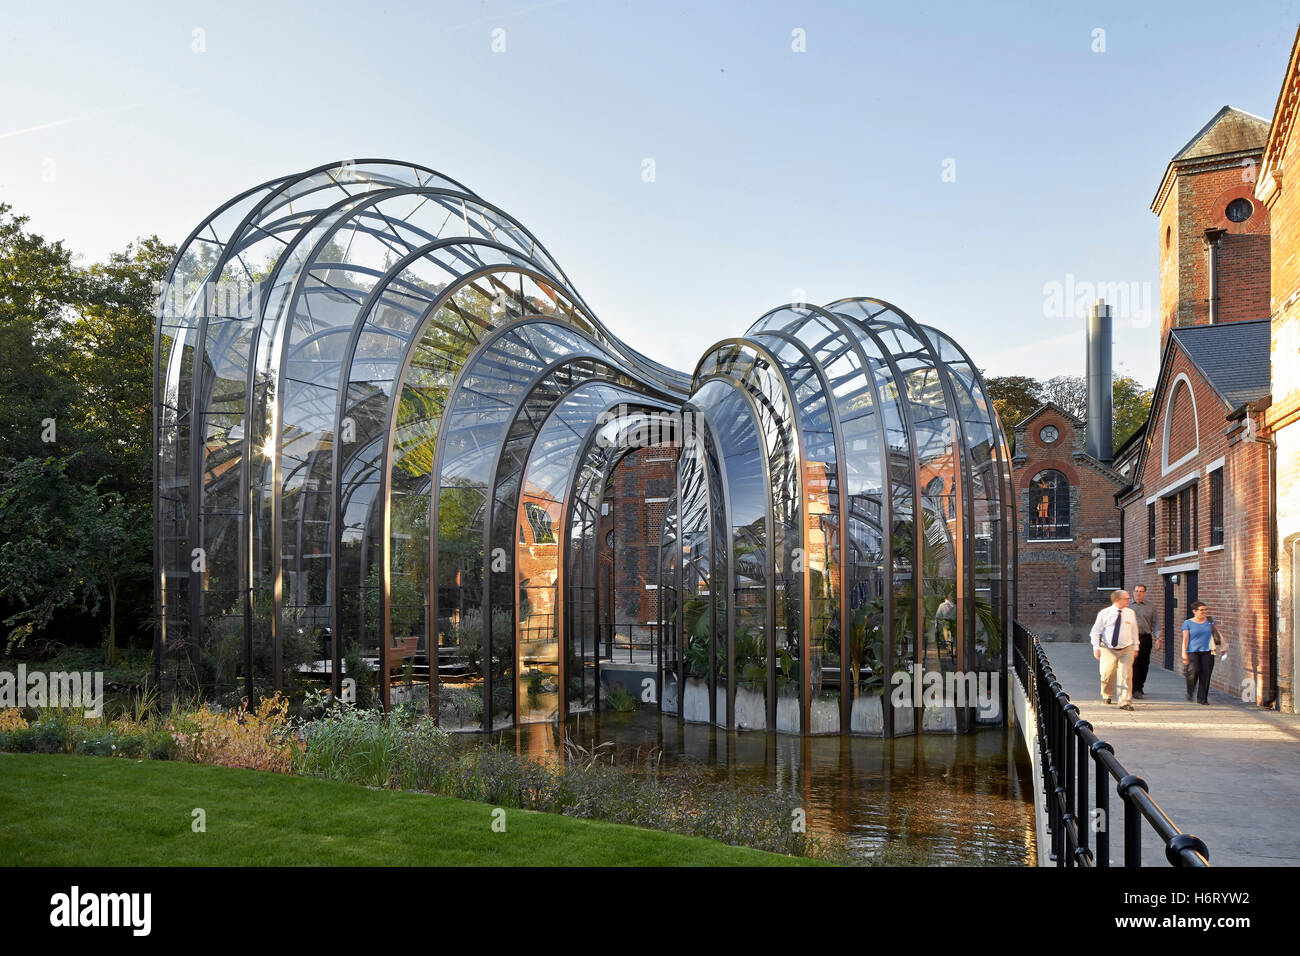 Historic mill site with curving greenhouse additions. Bombay Sapphire ...